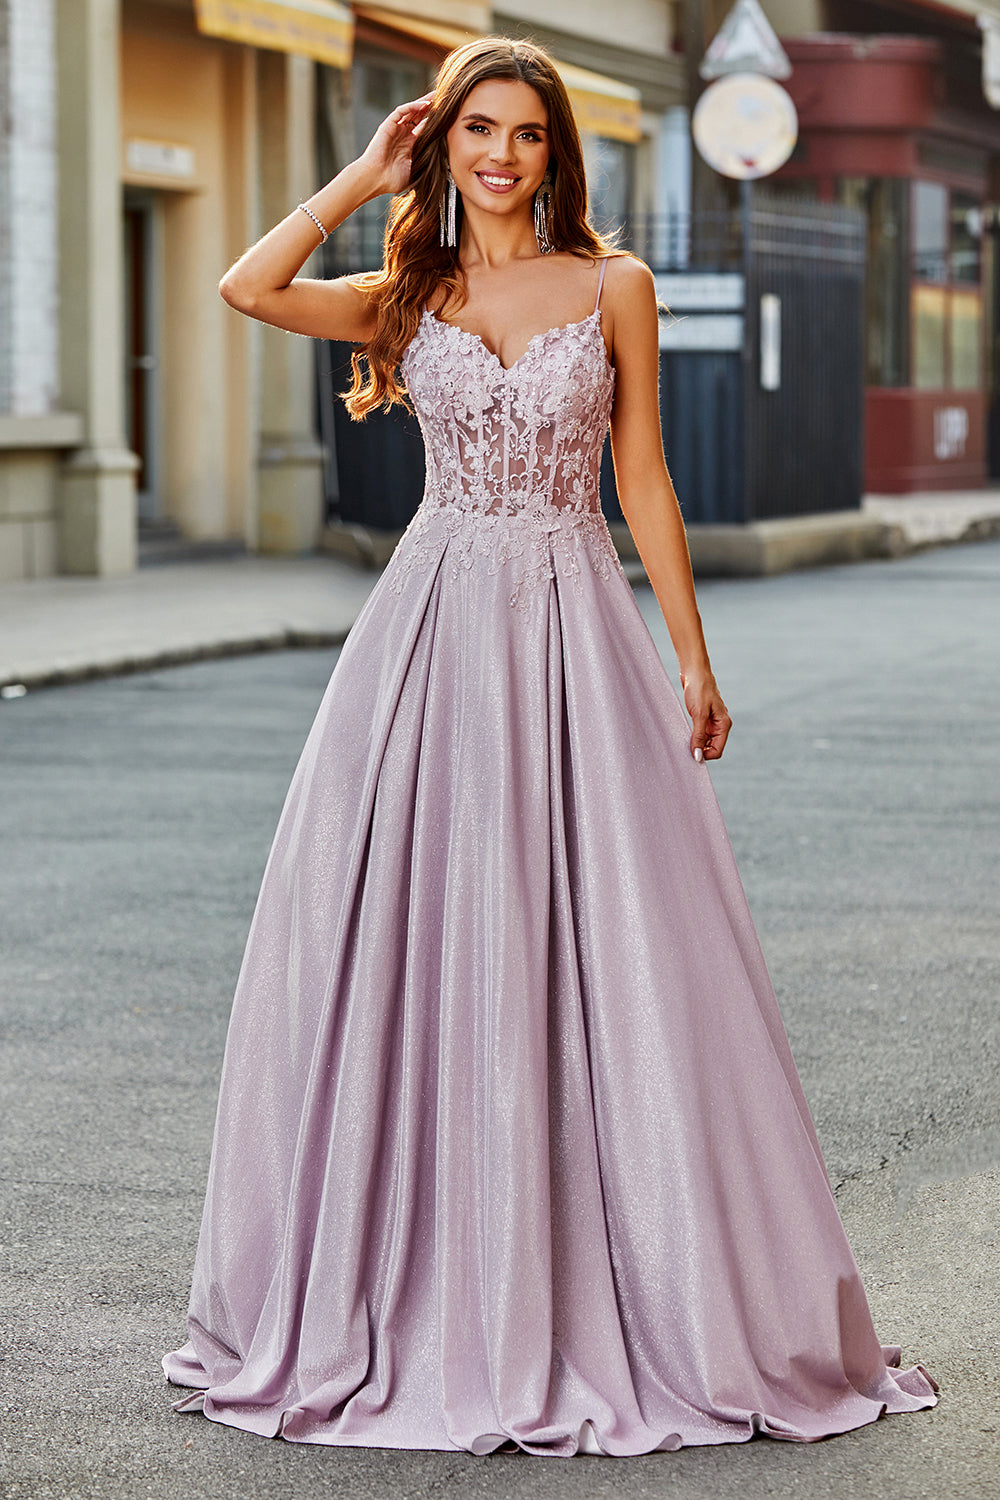 Sparkly Blush A Line Spaghetti Straps Long Corset Prom Dress With Beading